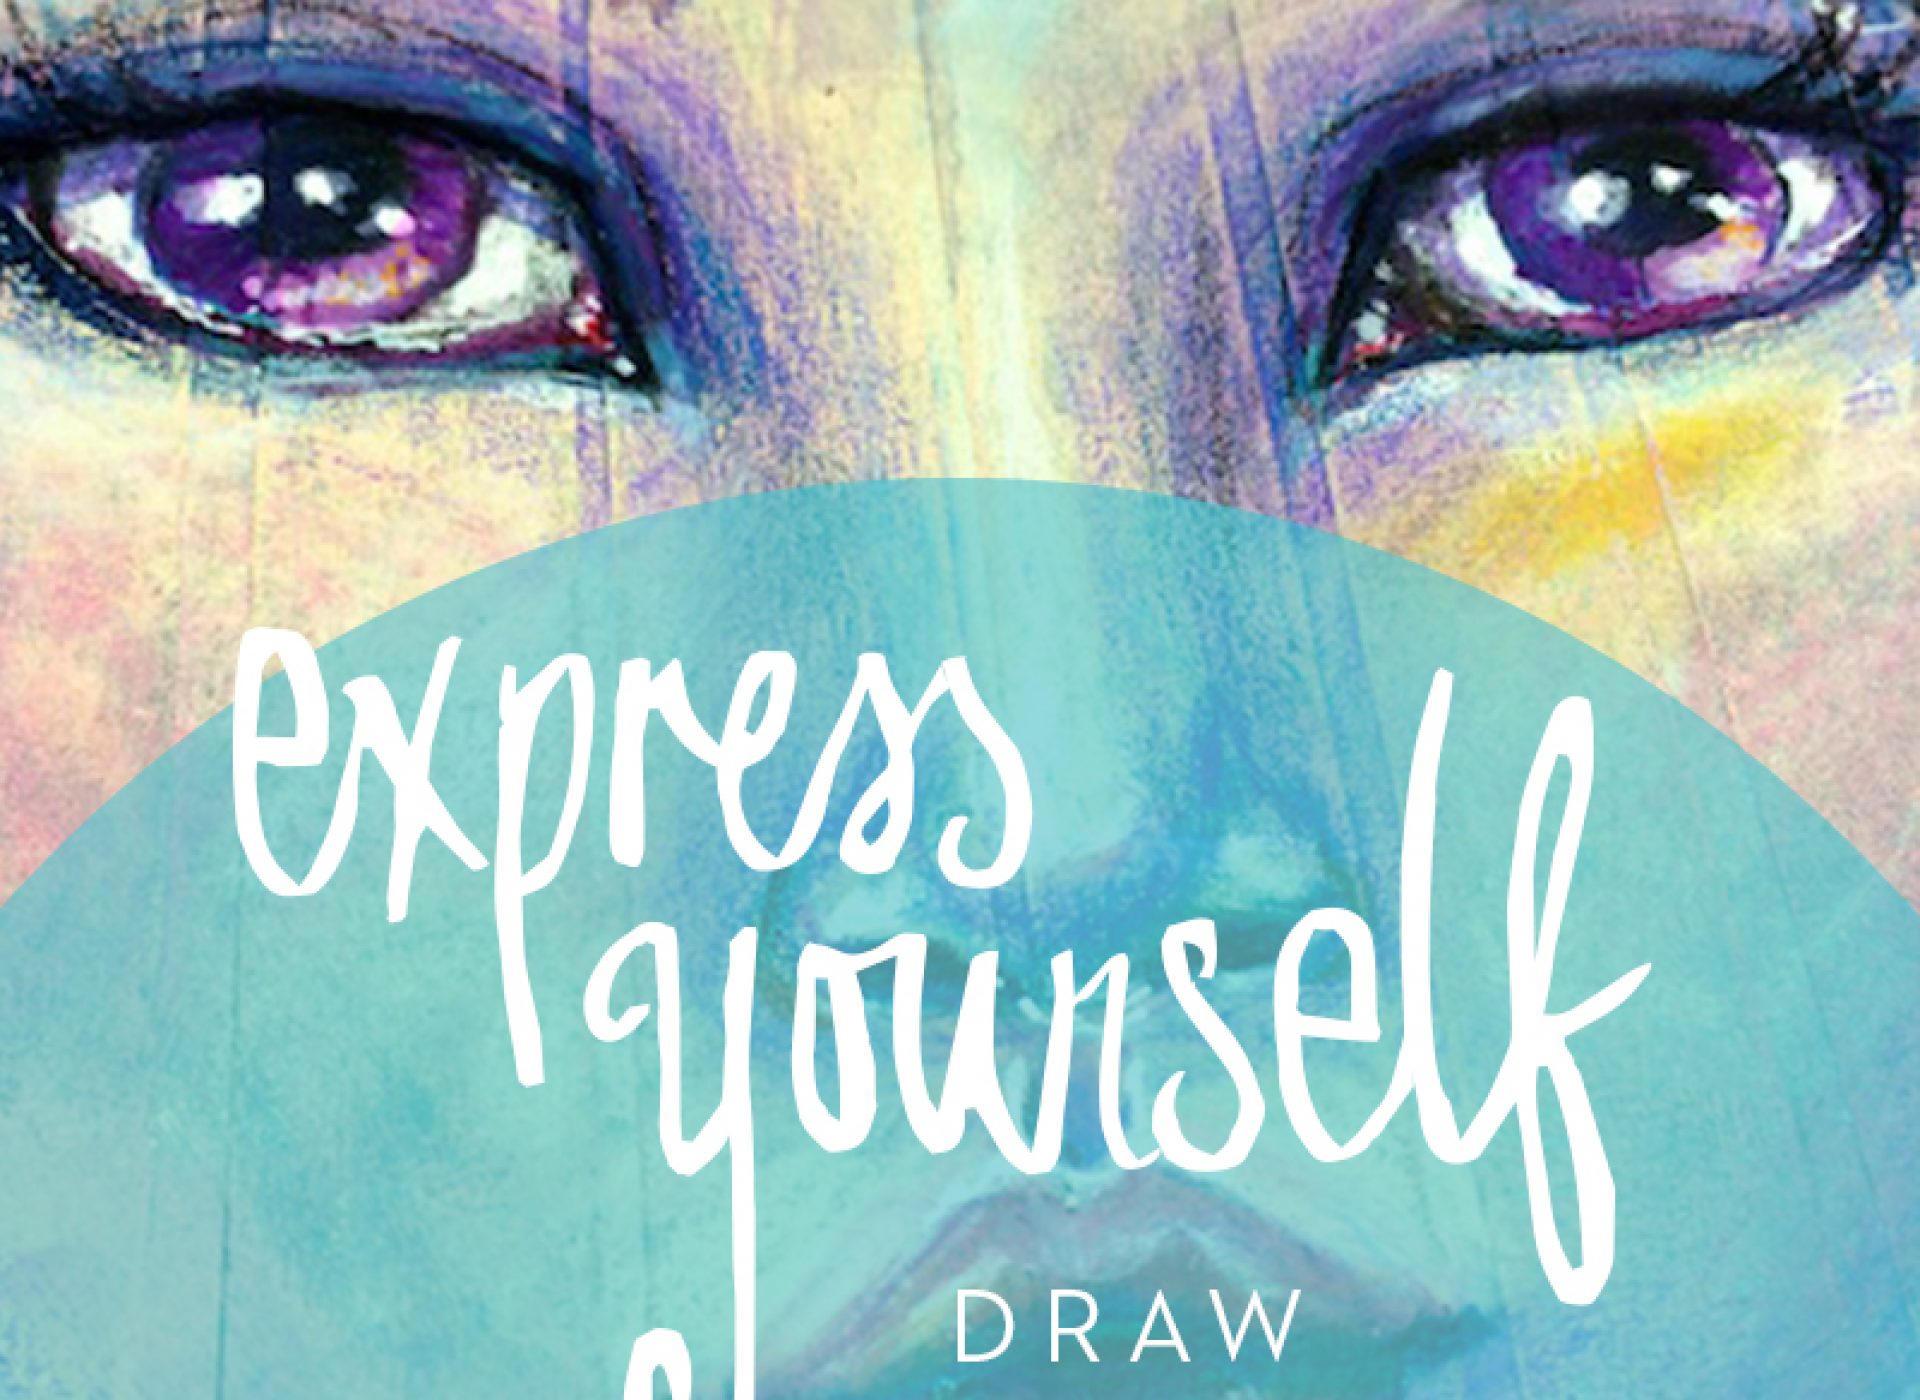 Express Yourself workshop Starts on Monday 31!